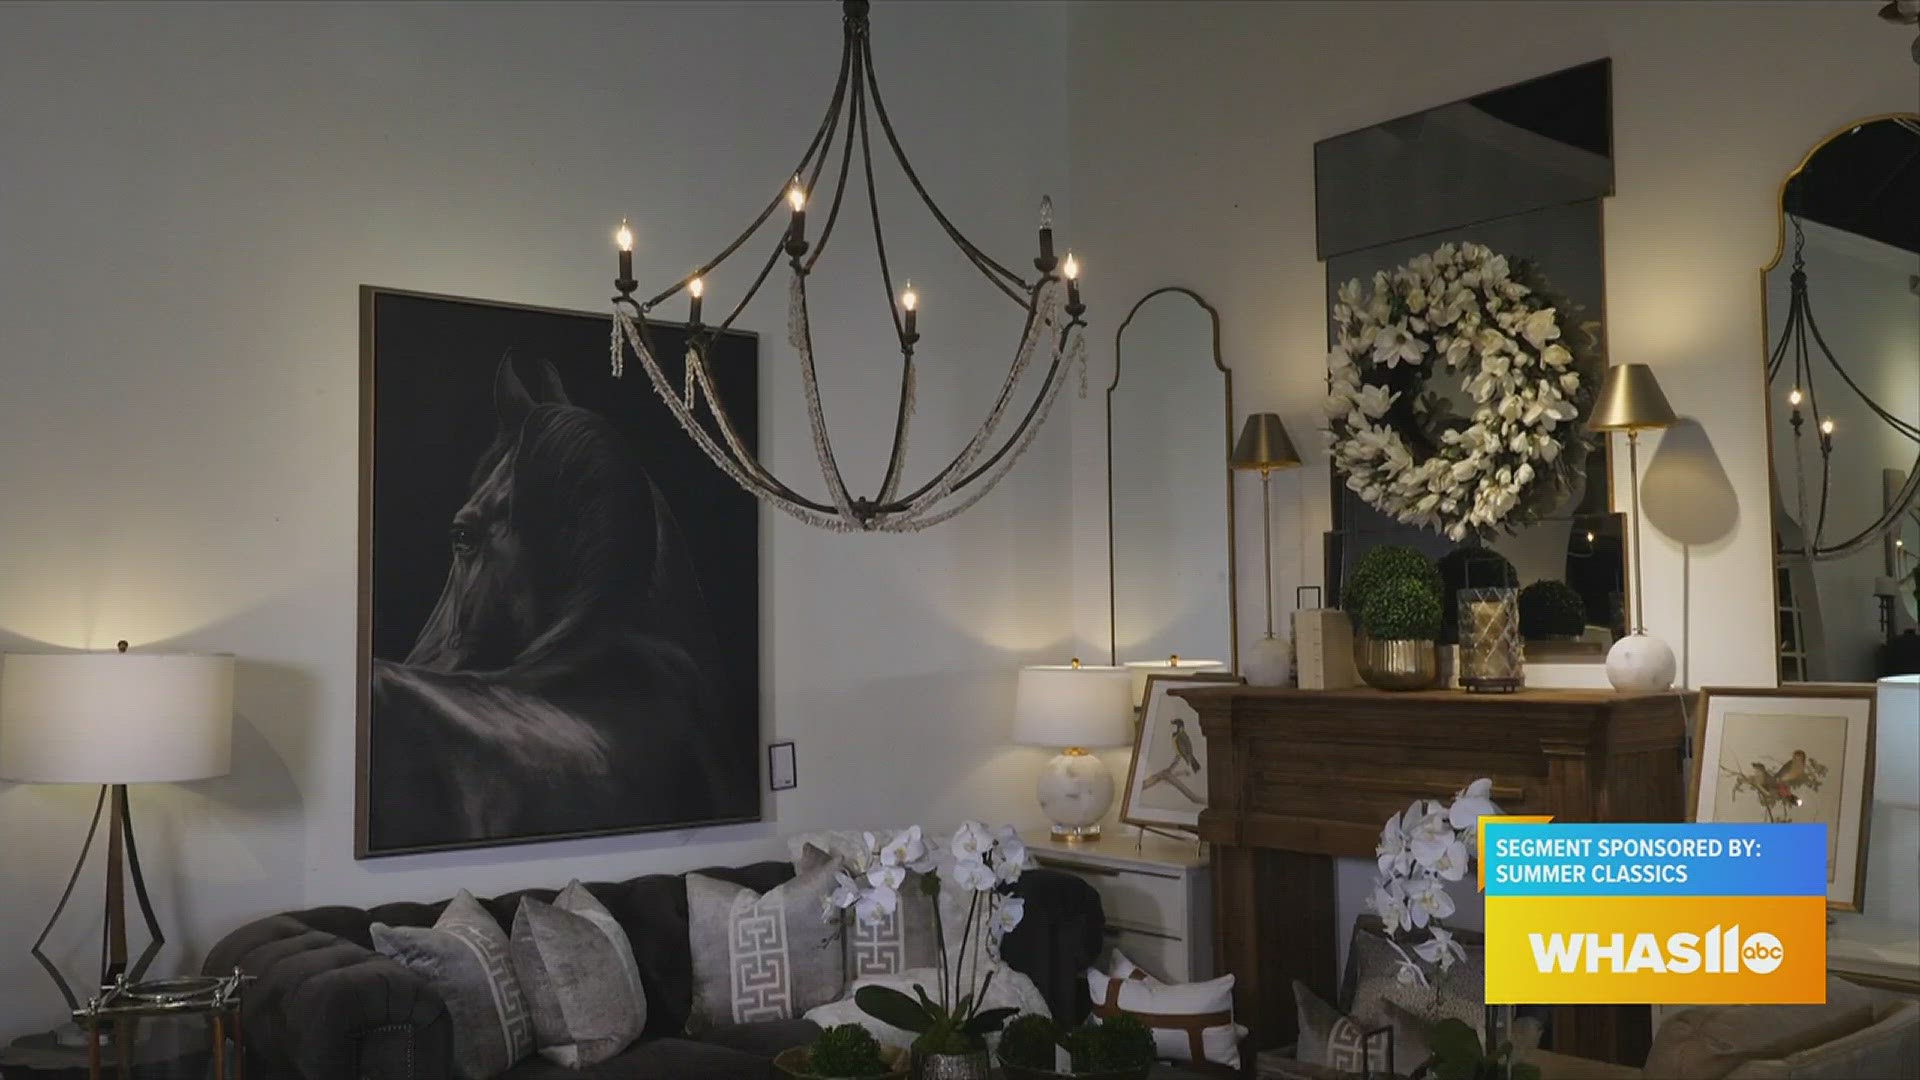 Summer Classics can help jazz up the inside of your home with great art and furniture.